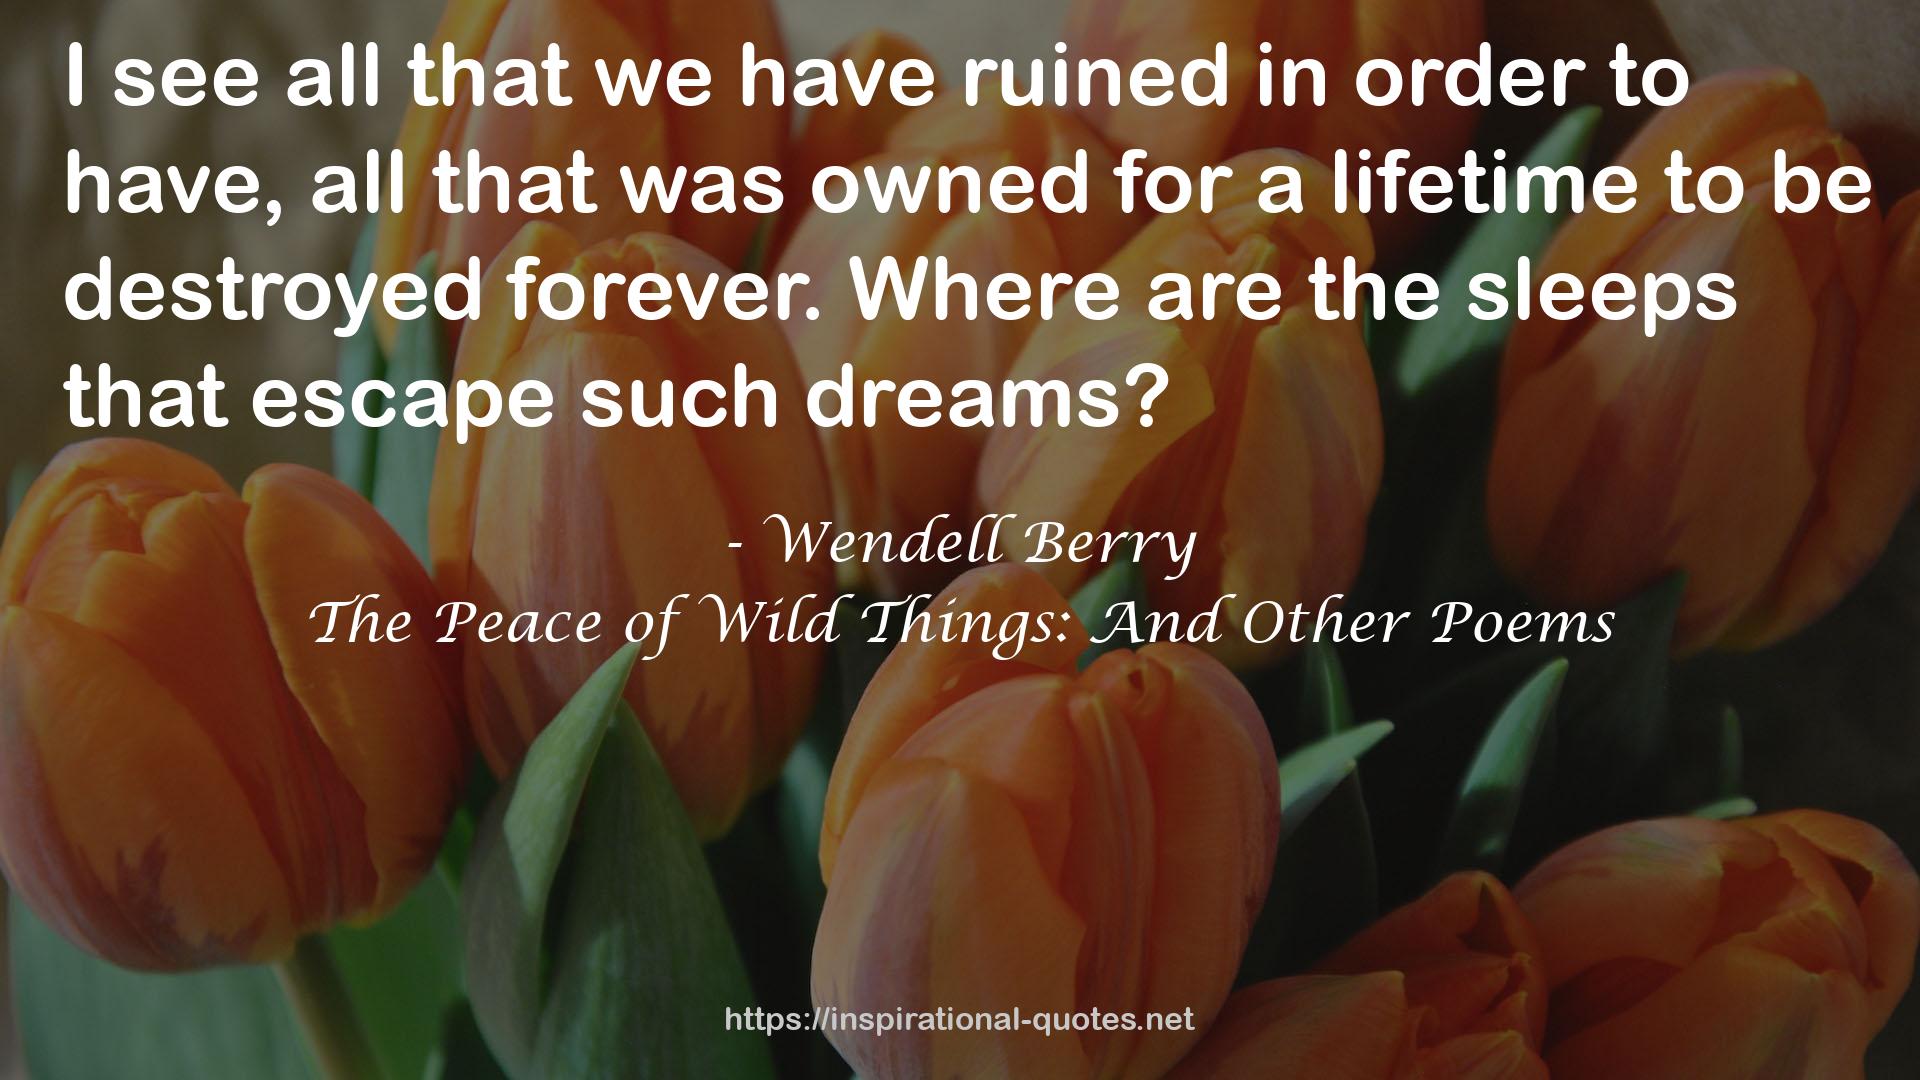 The Peace of Wild Things: And Other Poems QUOTES